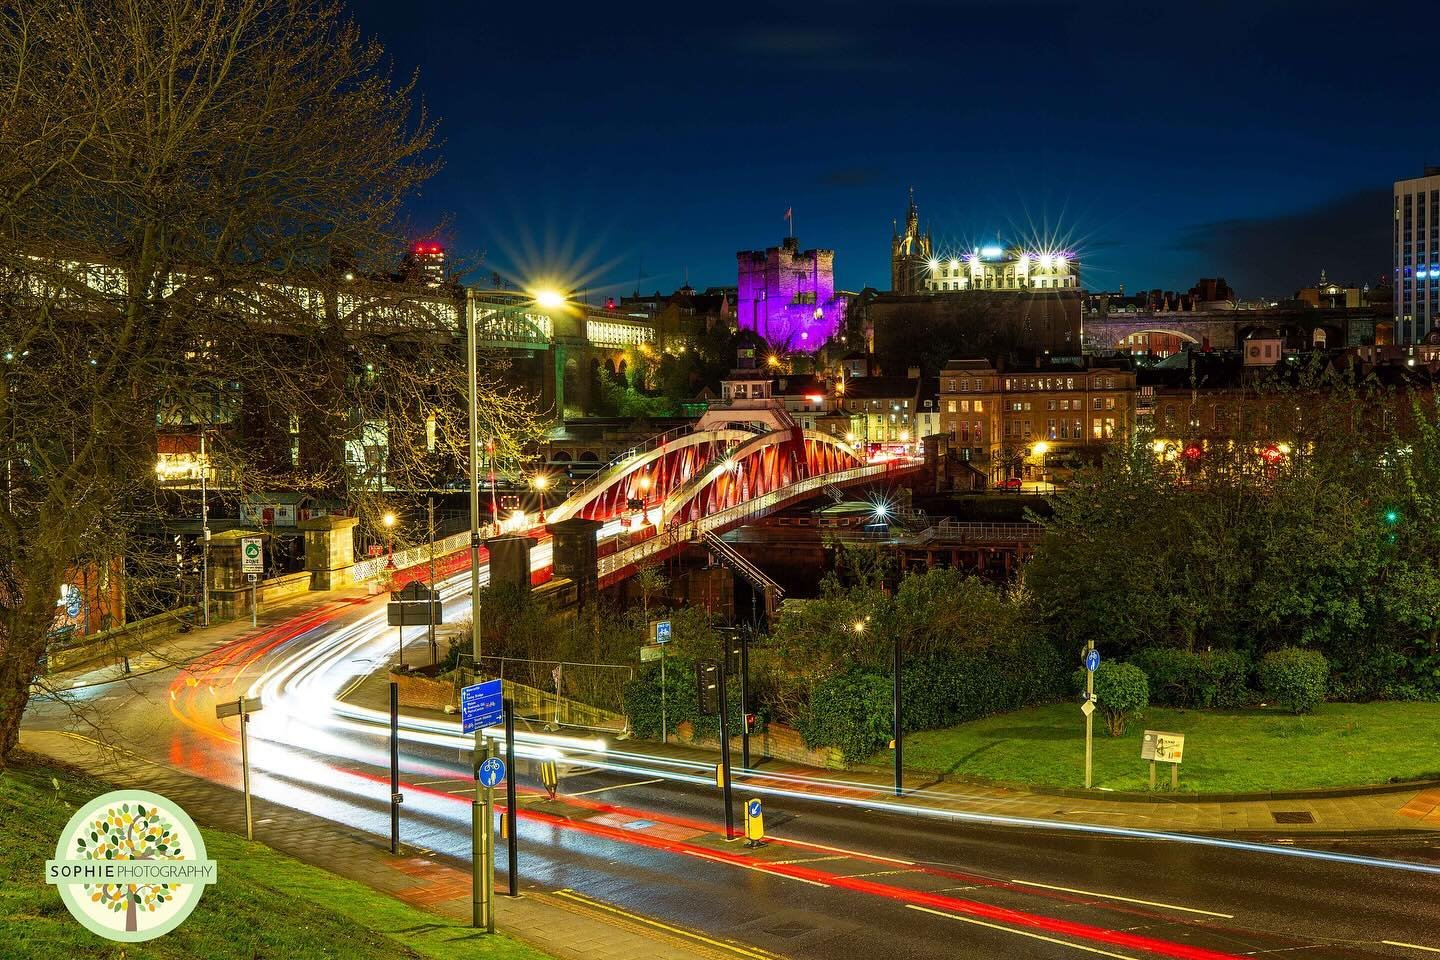 The Swing Bridge with matching light trails 🌁⁣
⁣
I love this view from Gateshead looking towards Newcastle, you can see so many spectacular buildings, from the Castle Keep, to St Nicholas&rsquo; Cathedral and even the Vermont Hotel. ⁣
⁣
At blue hour